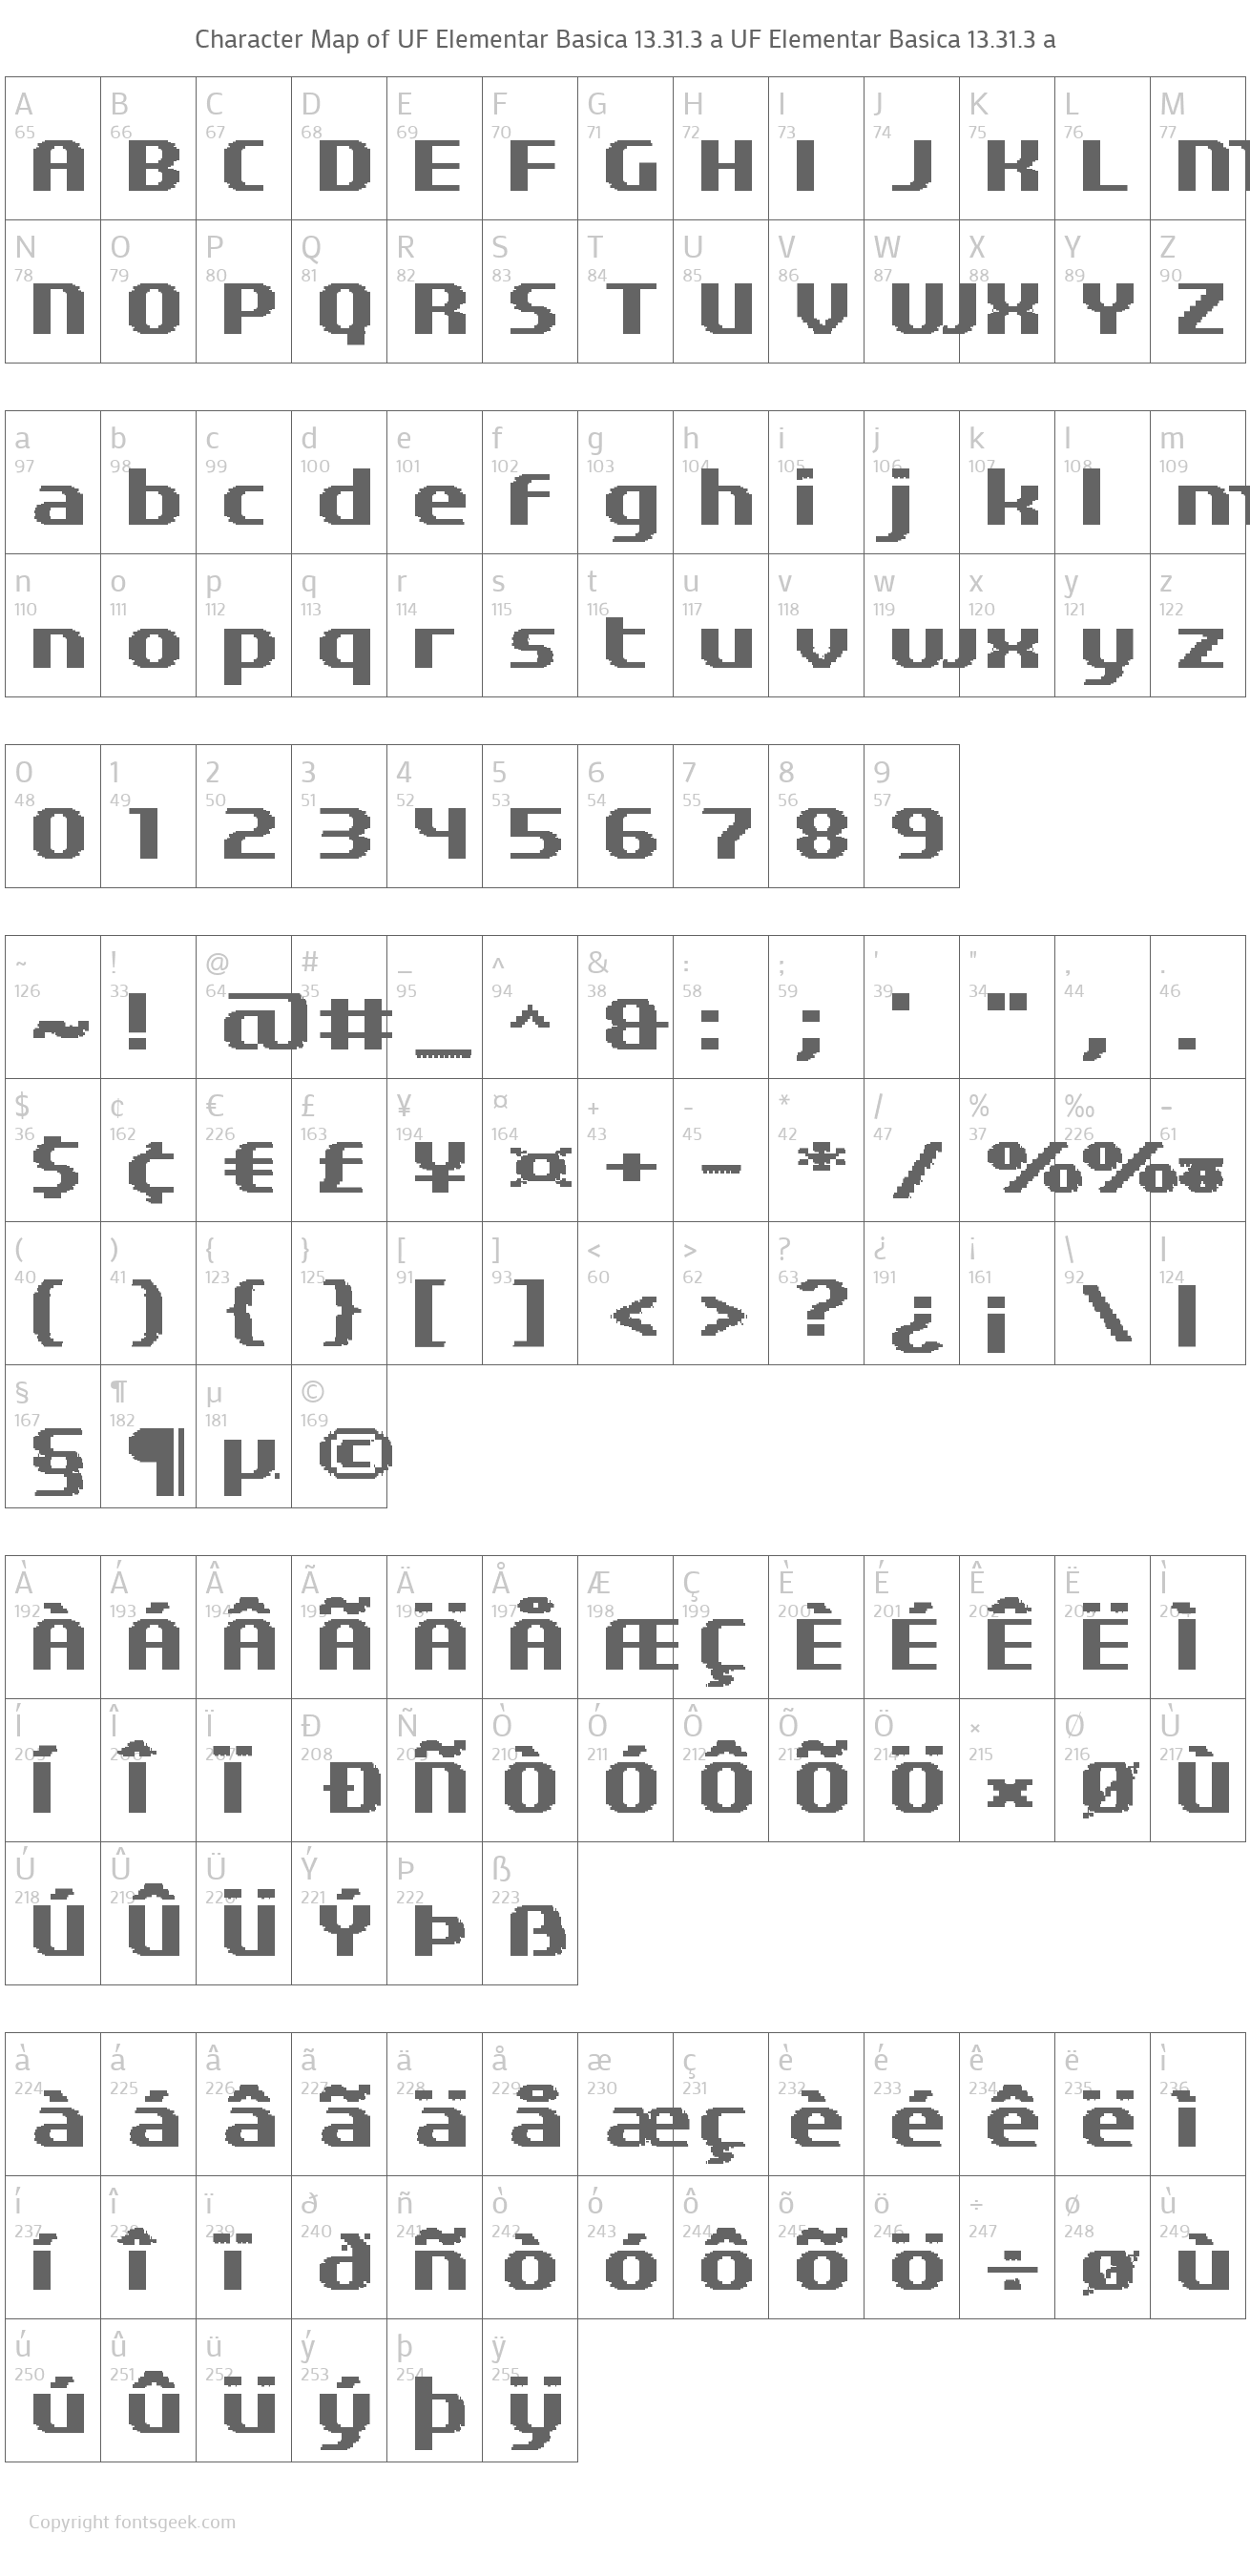 Uf Elementar Basica 13 31 3 A Font Download For Free View Sample Text Rating And More On Fontsgeek Com